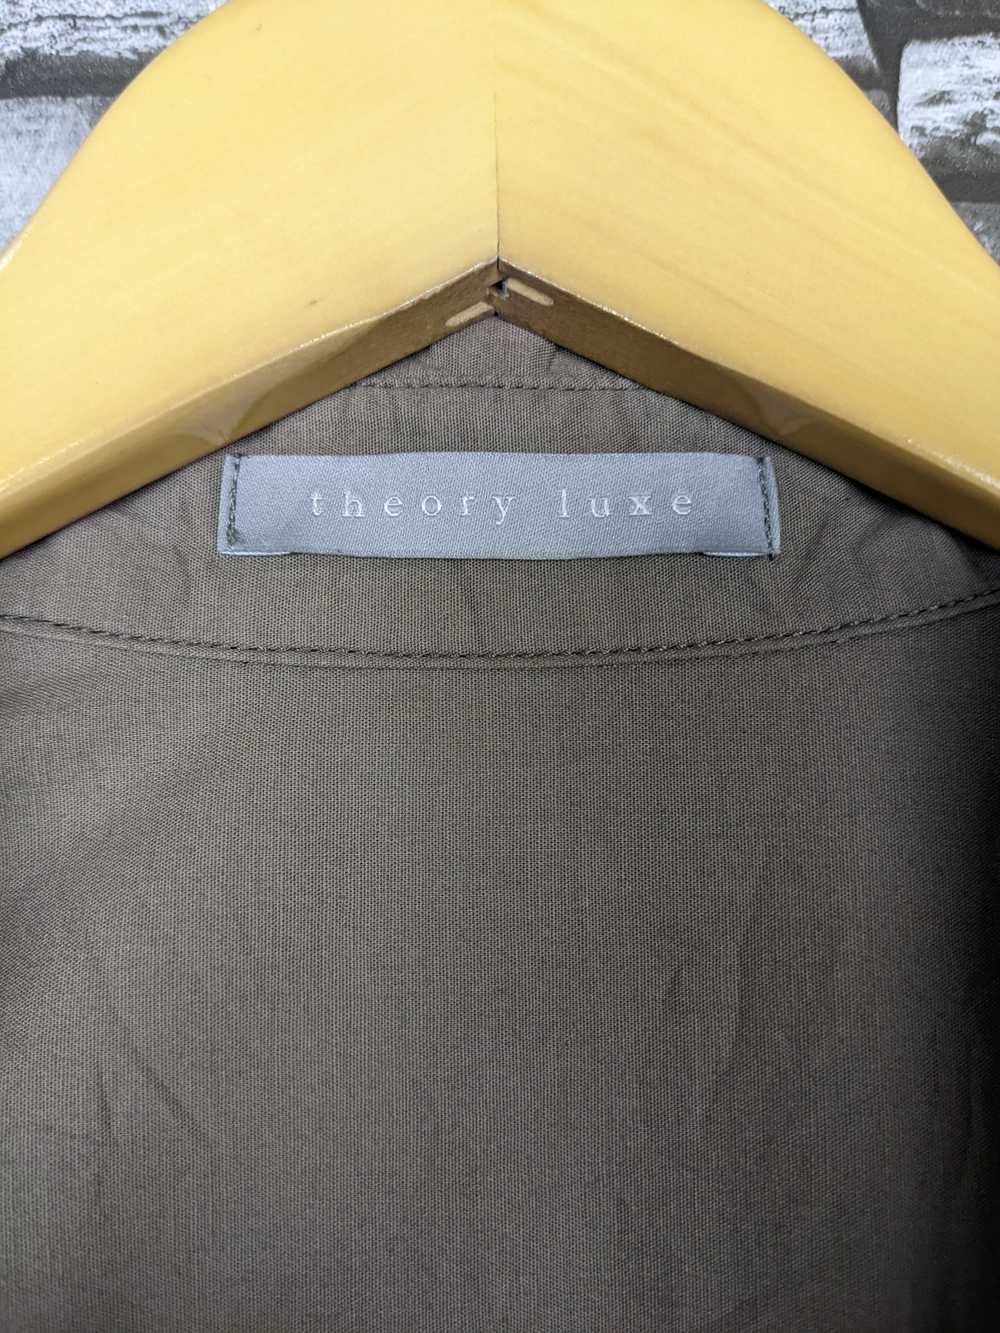 Avant Garde × Theory Vintage Theory Luxe Long But… - image 7